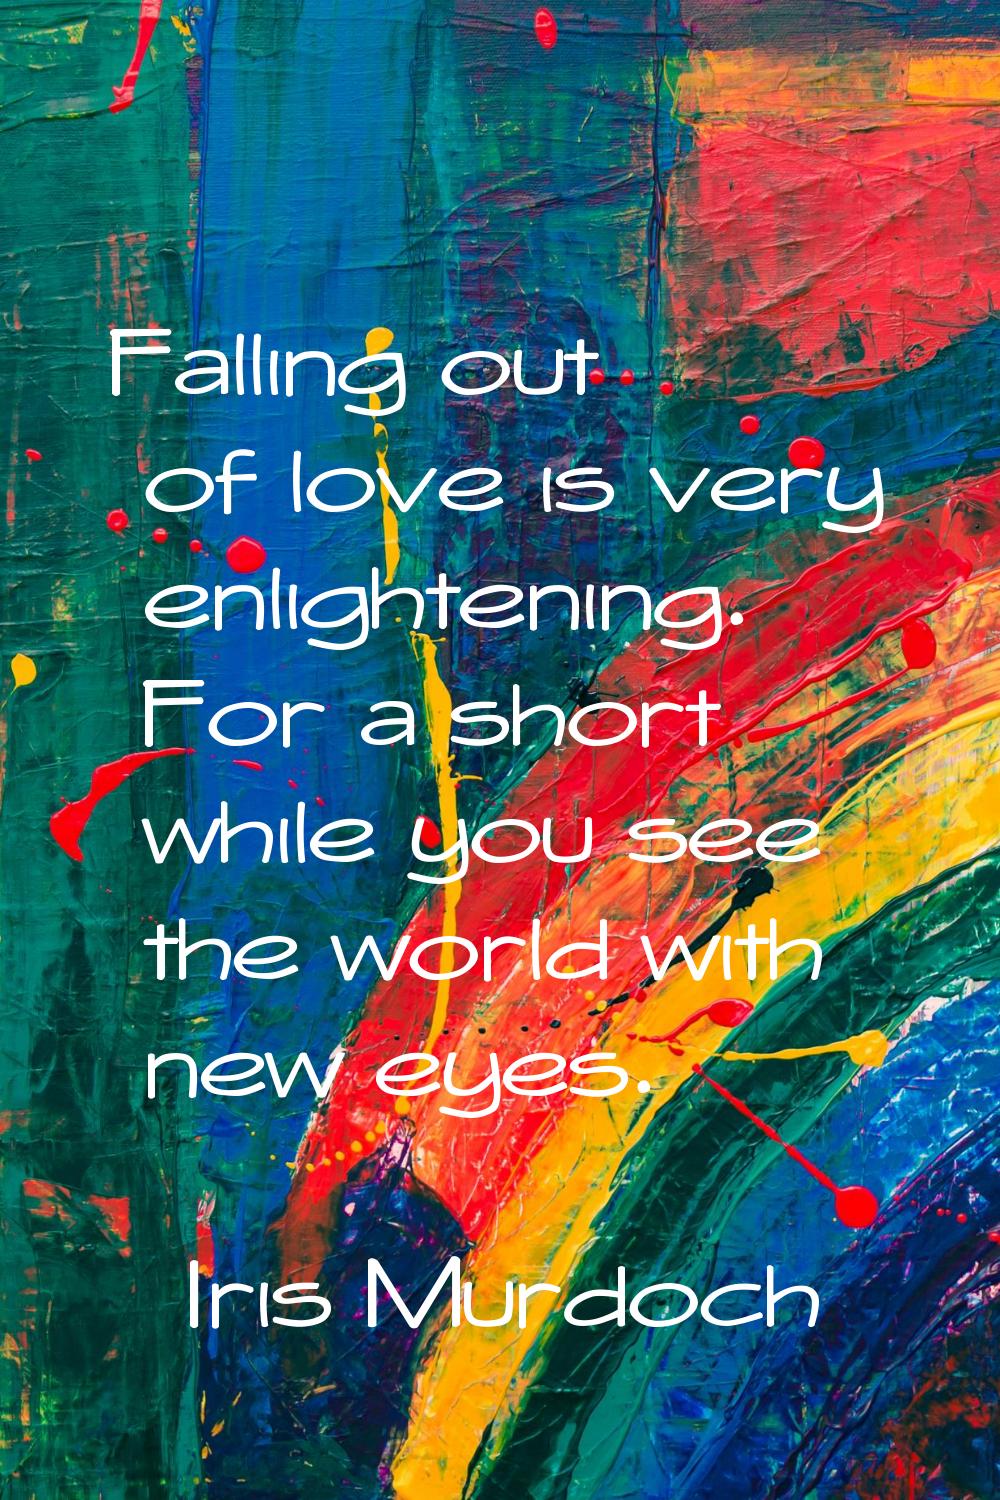 Falling out of love is very enlightening. For a short while you see the world with new eyes.